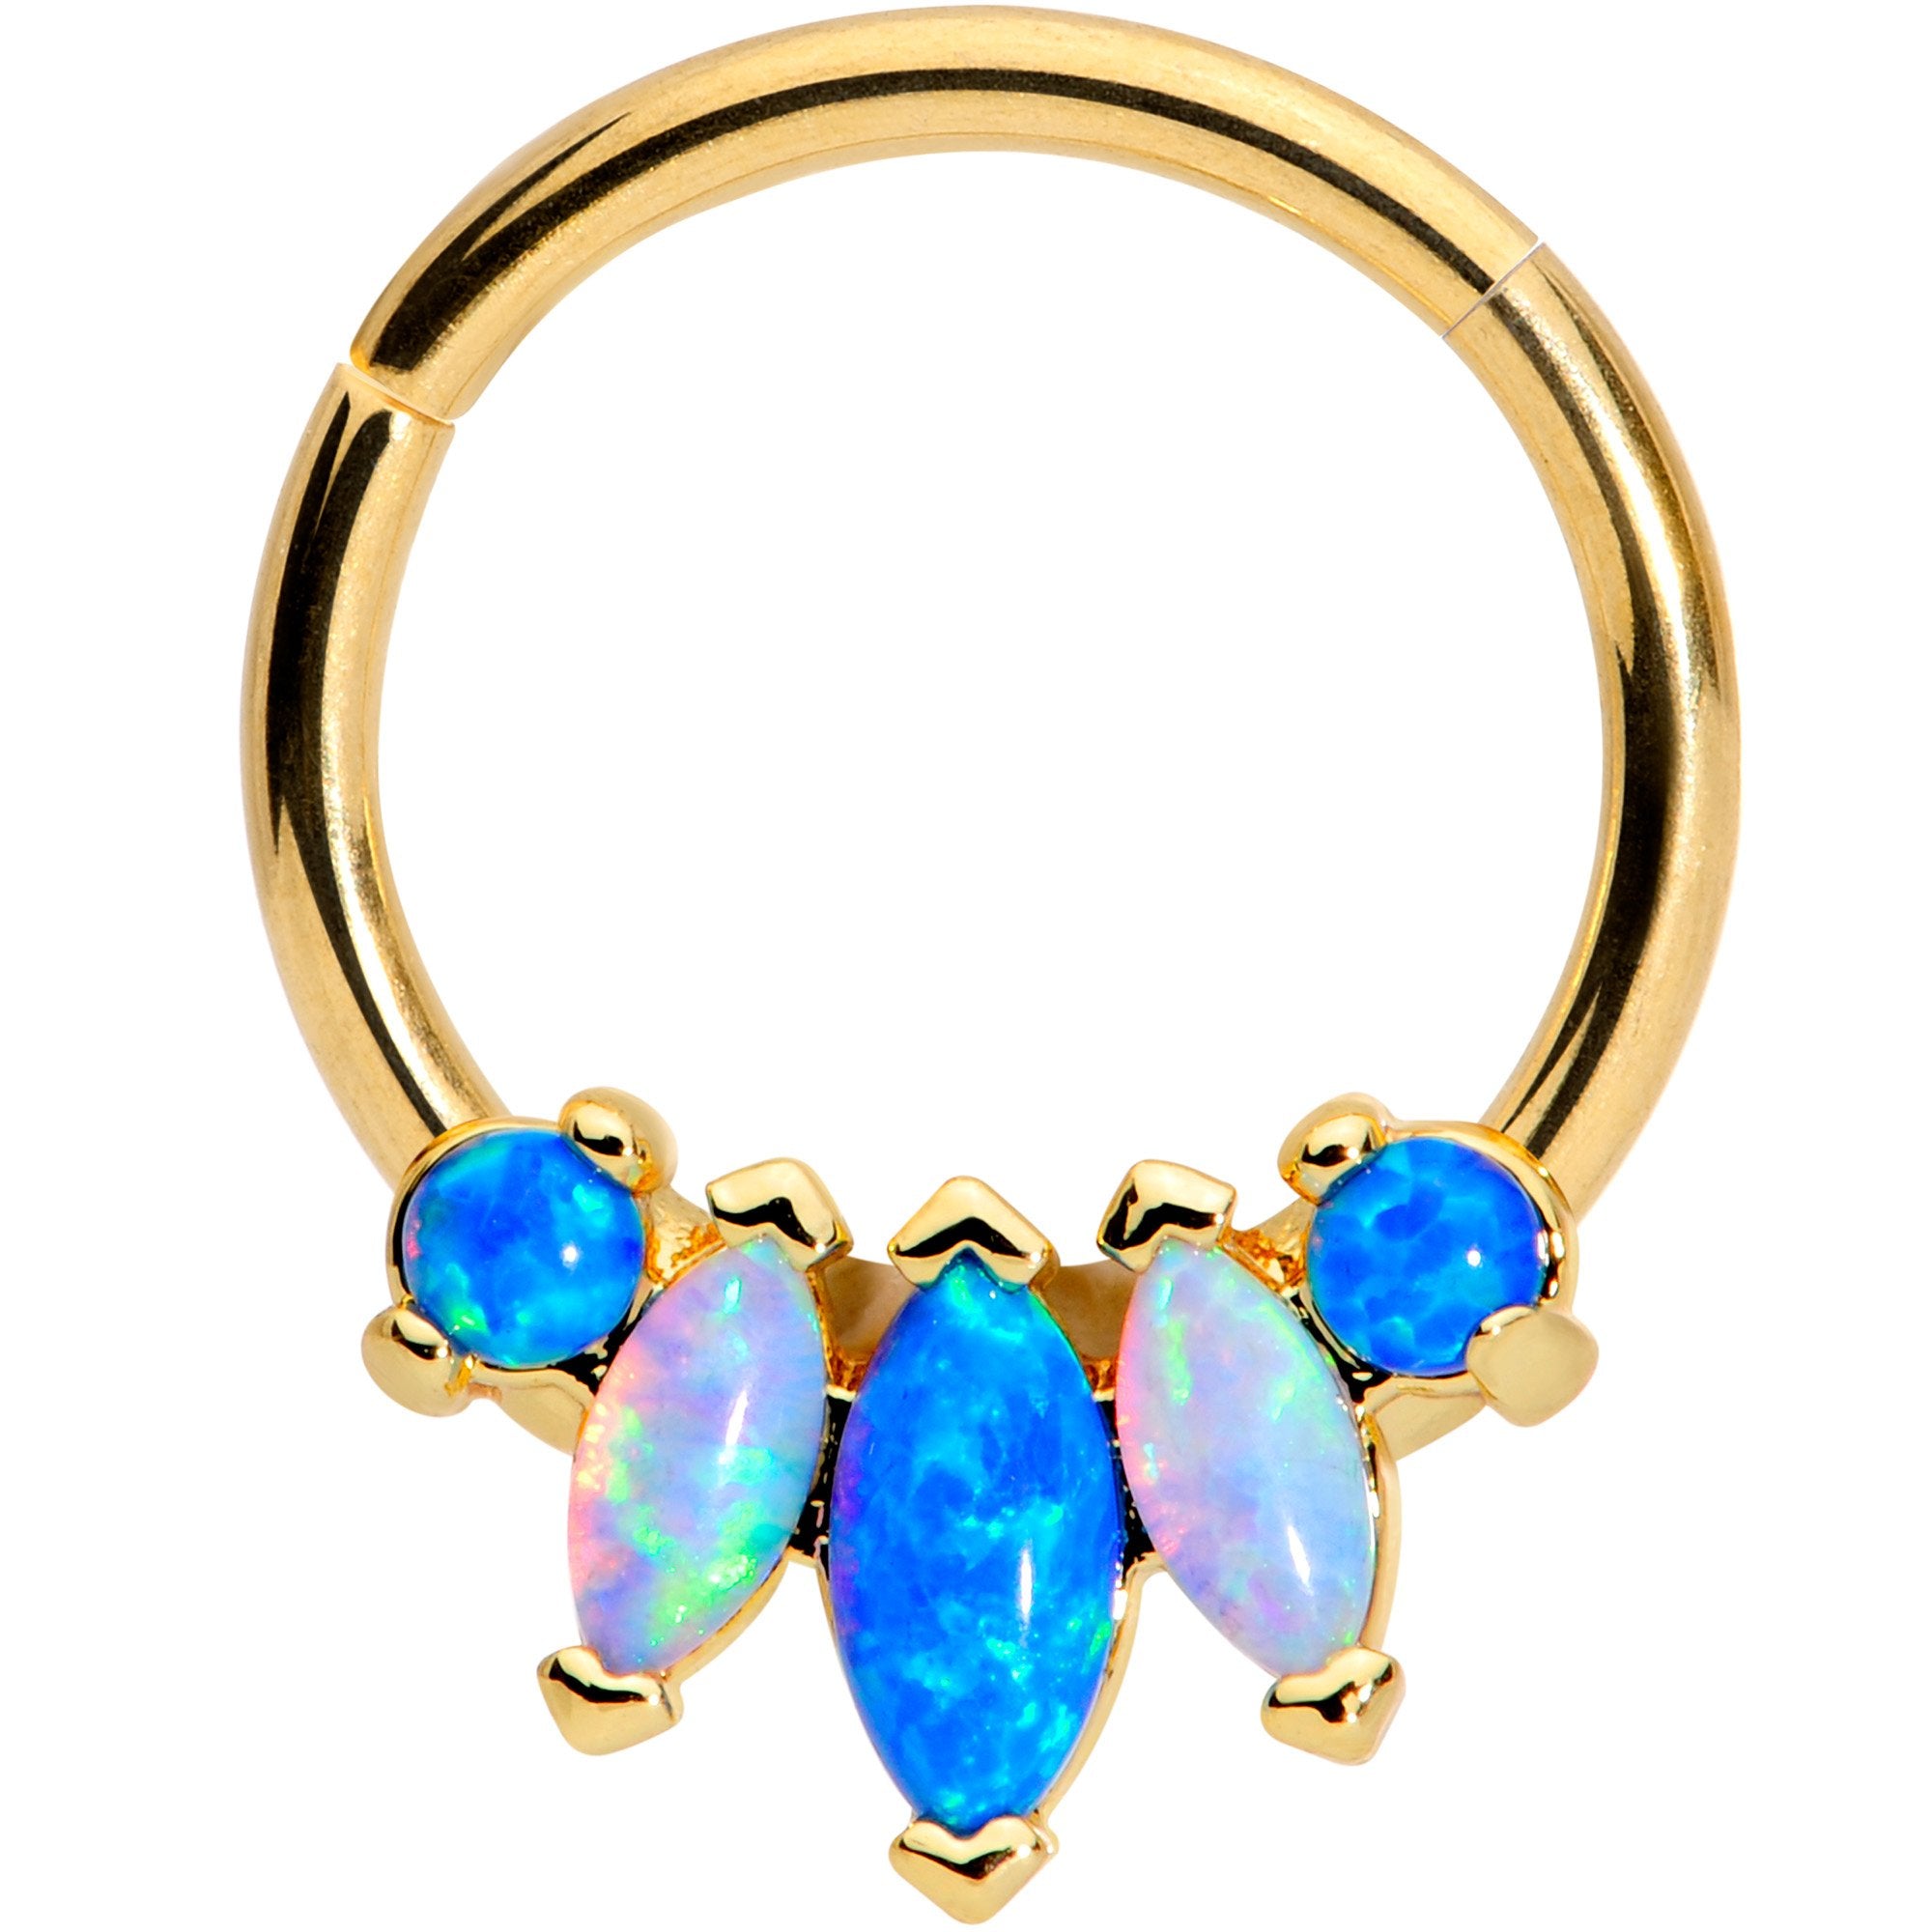 Image of 16 Gauge 3/8 Blue White Synthetic Opal Gold Tone Hinged Segment Ring